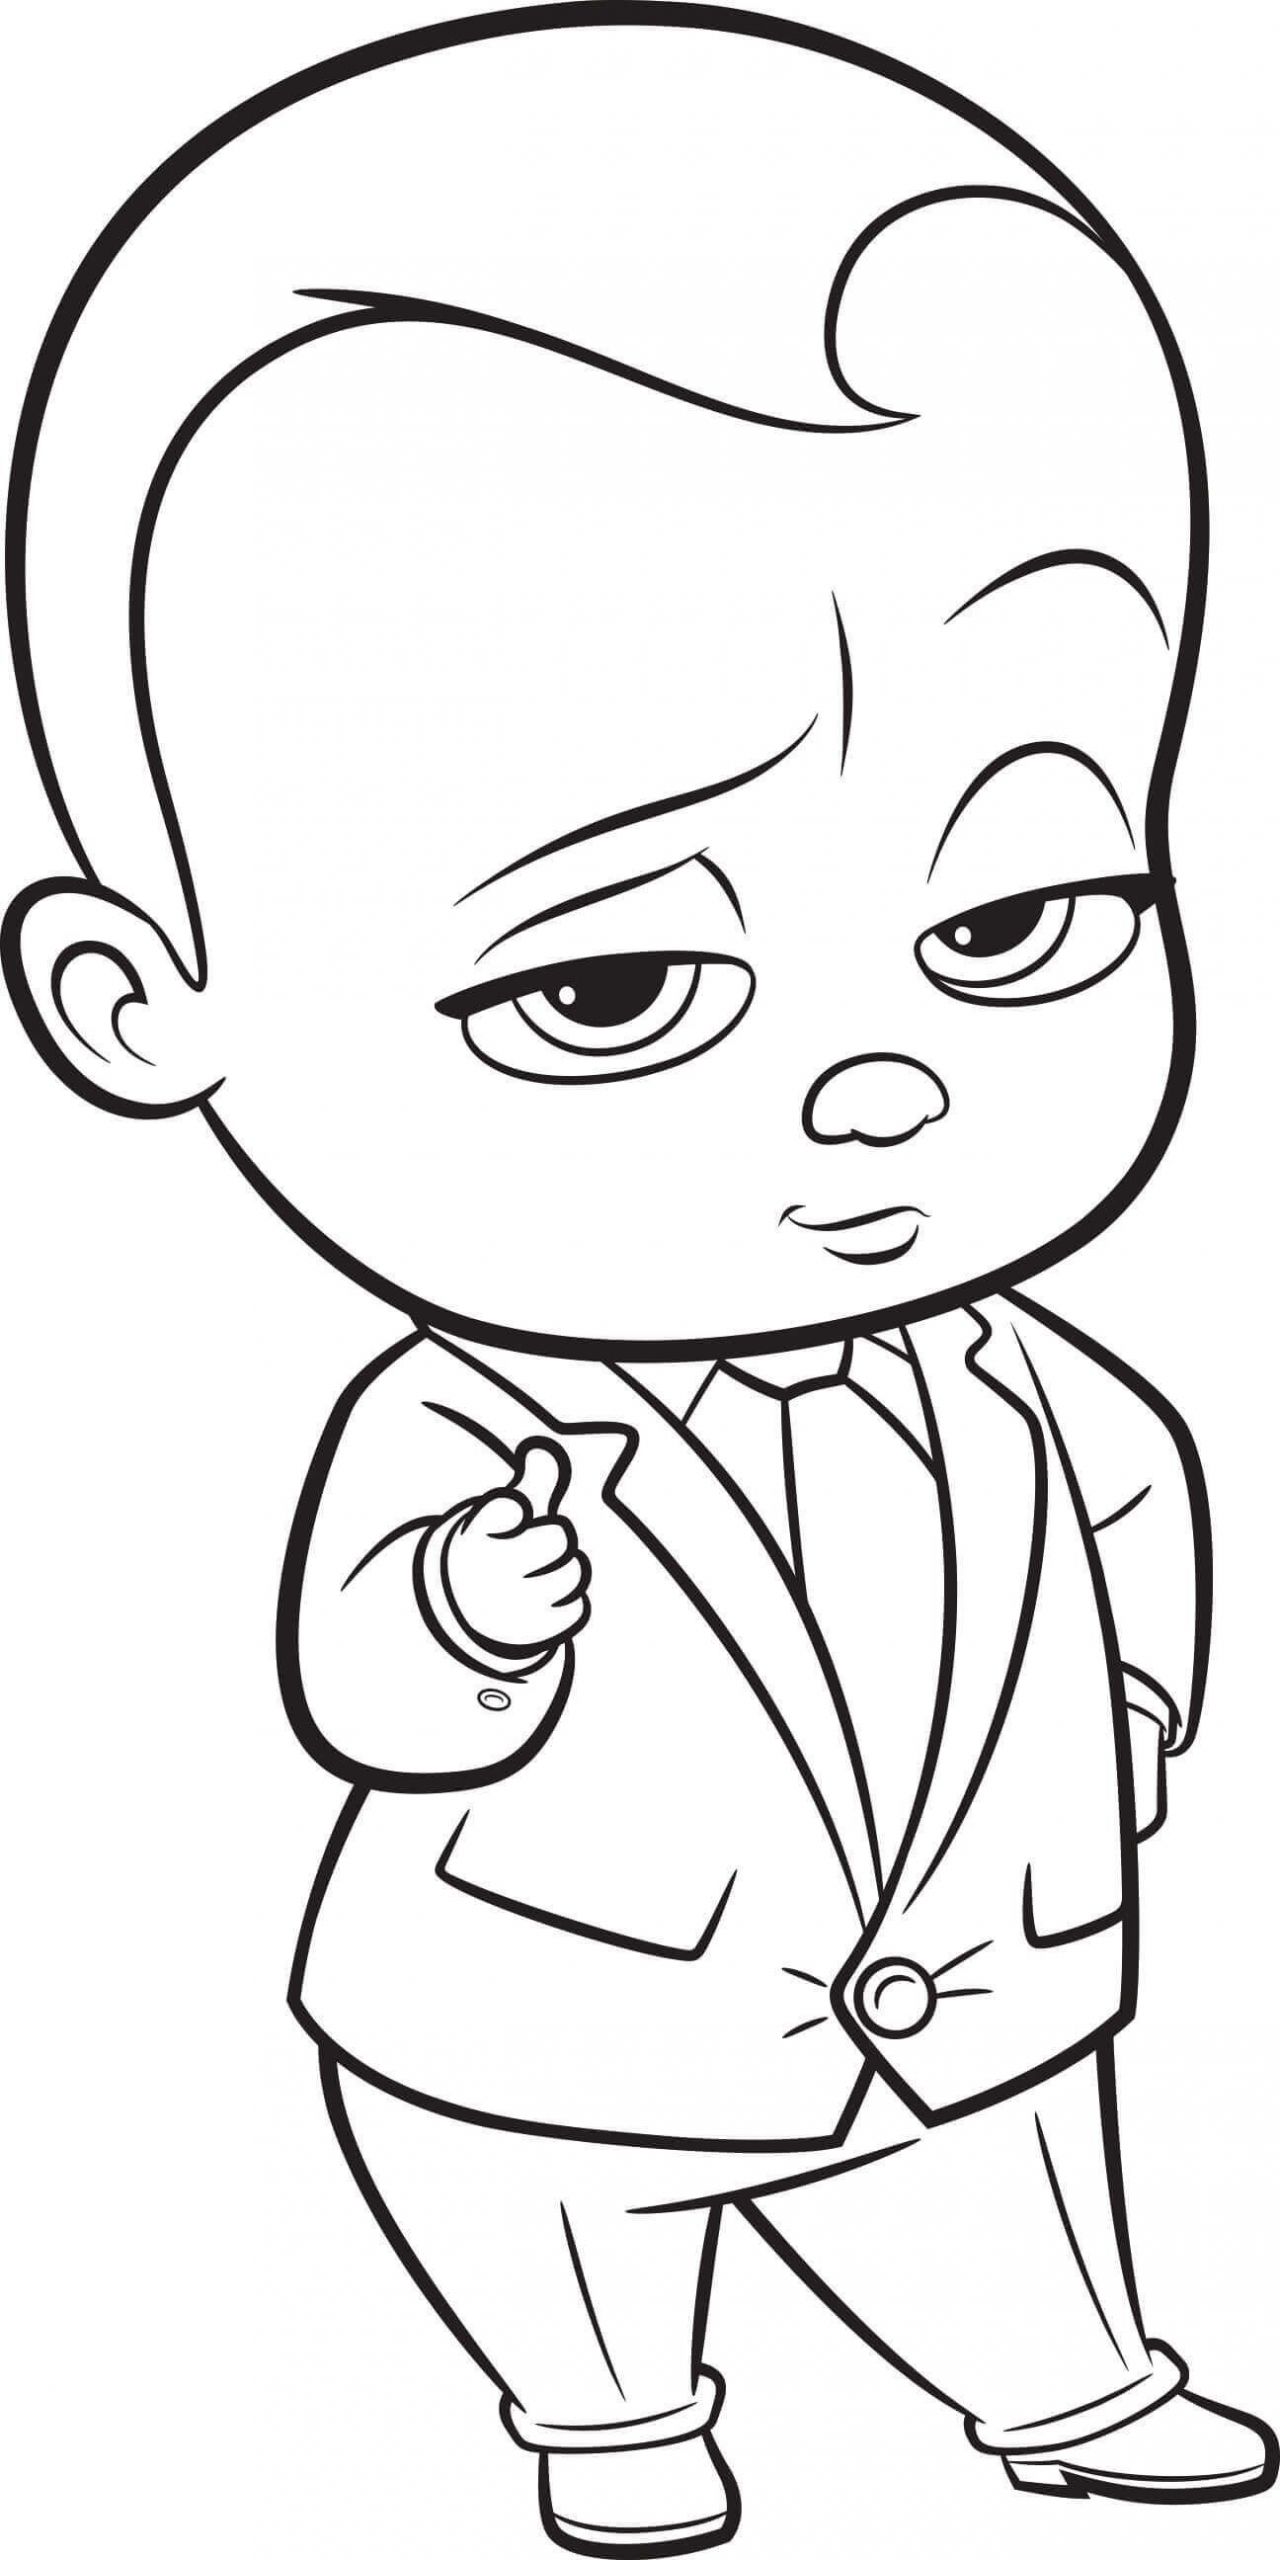 Boss Baby Coloring Page
 Top 10 The Boss Baby Coloring Pages